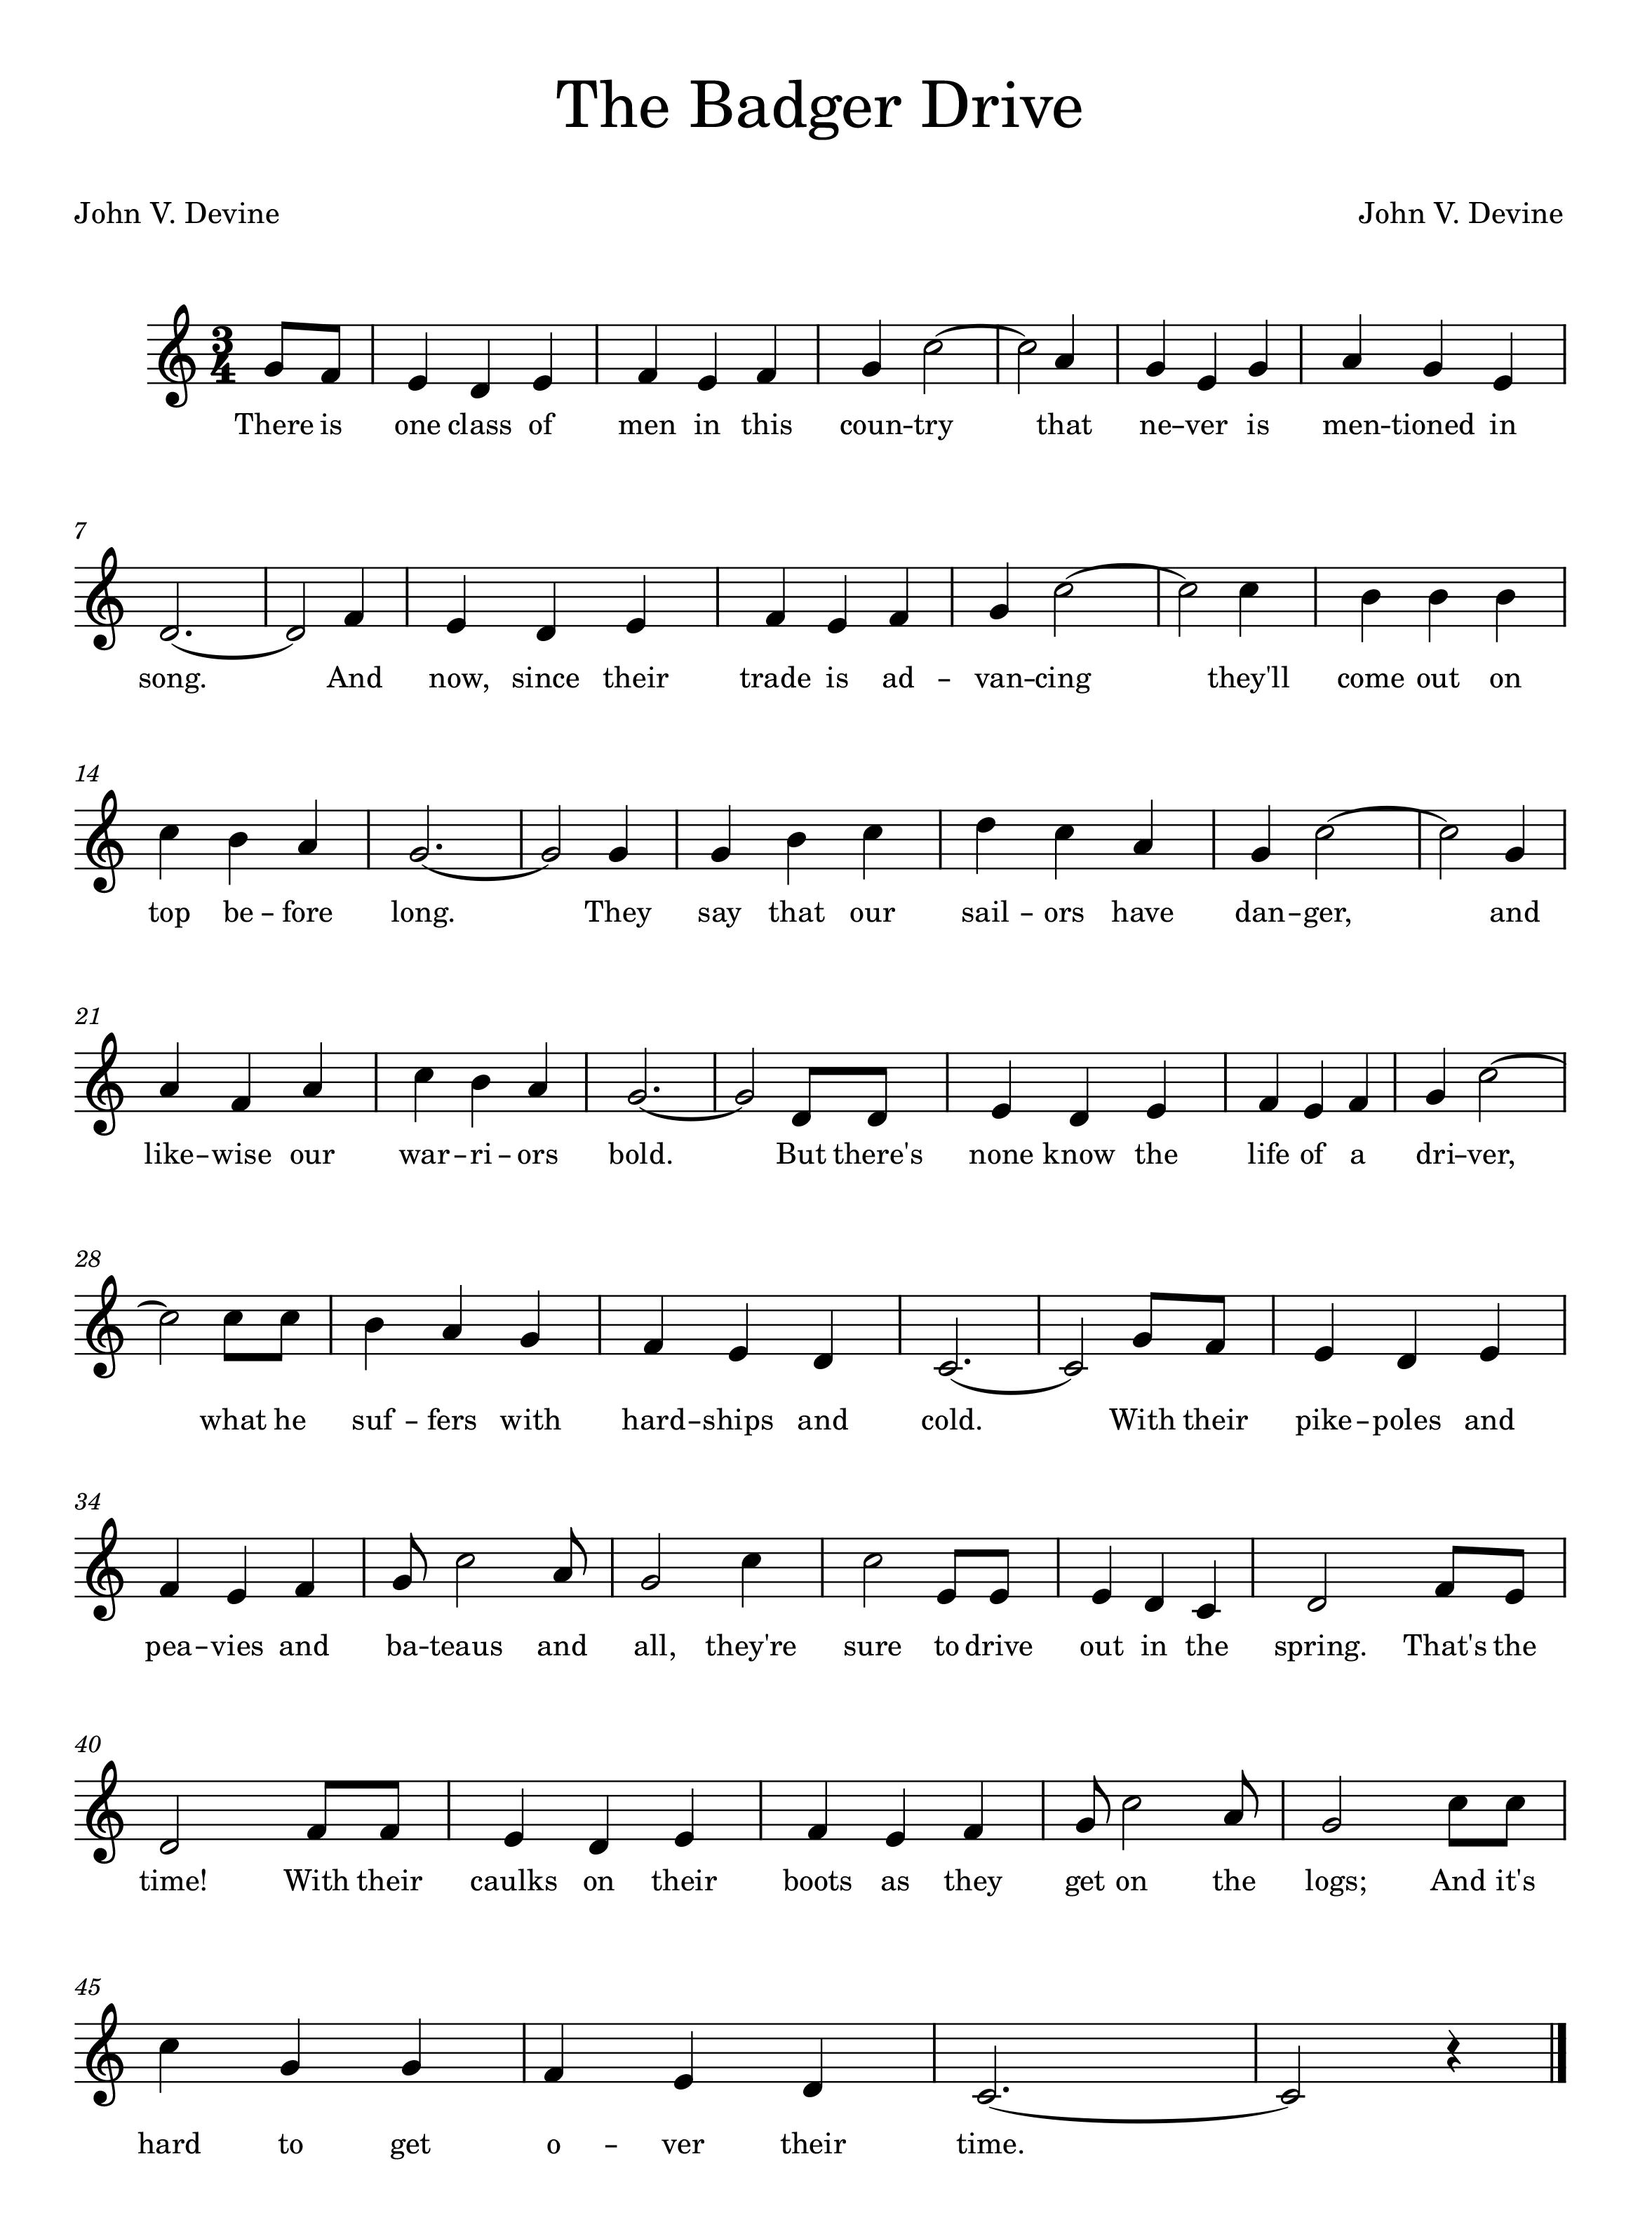 Sheet music for "The Badger Drive"